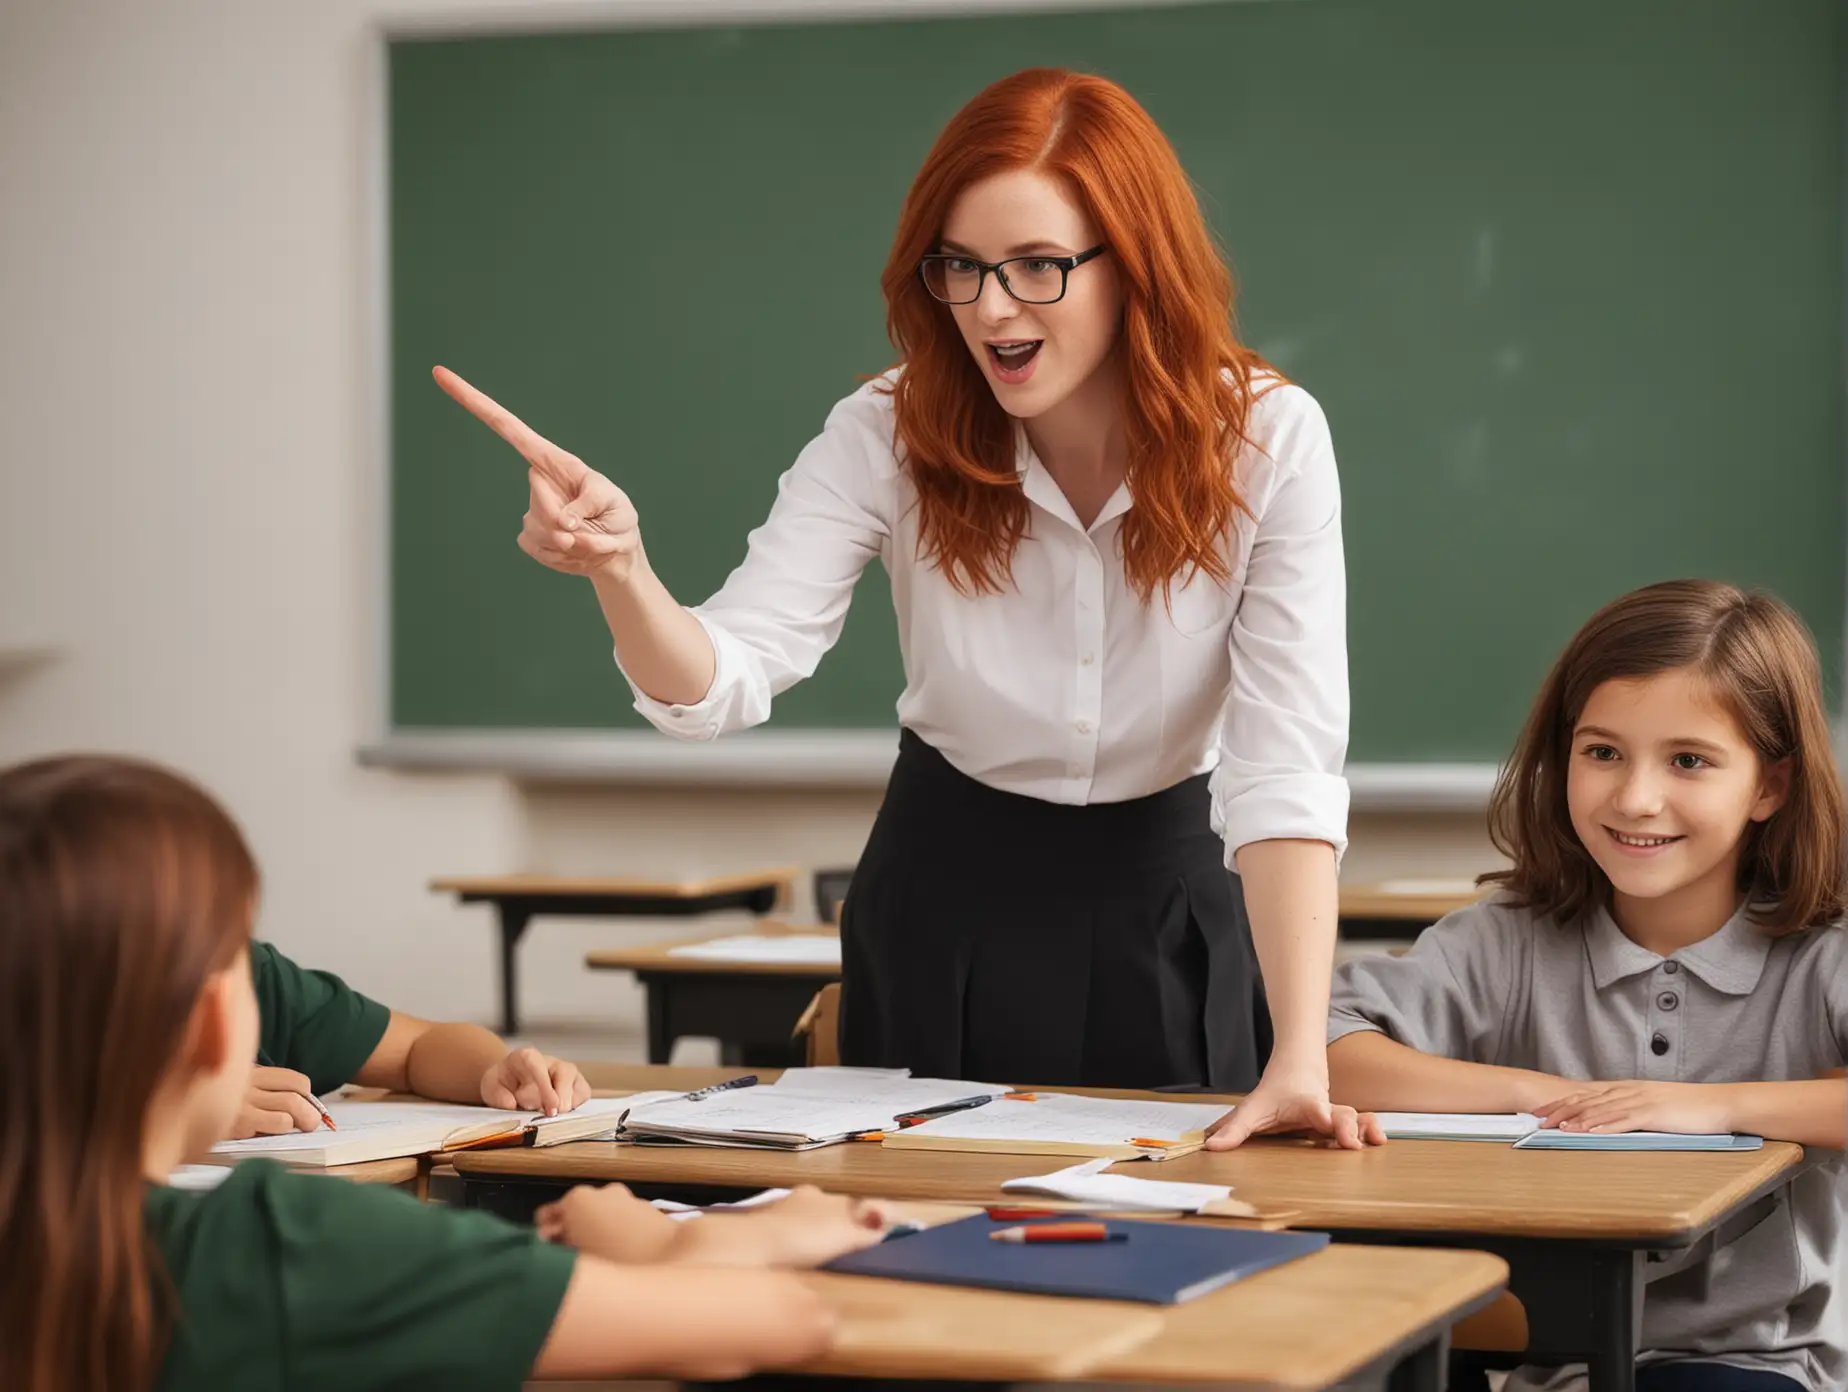 Red Headed Teacher Engaging Students in Classroom Learning